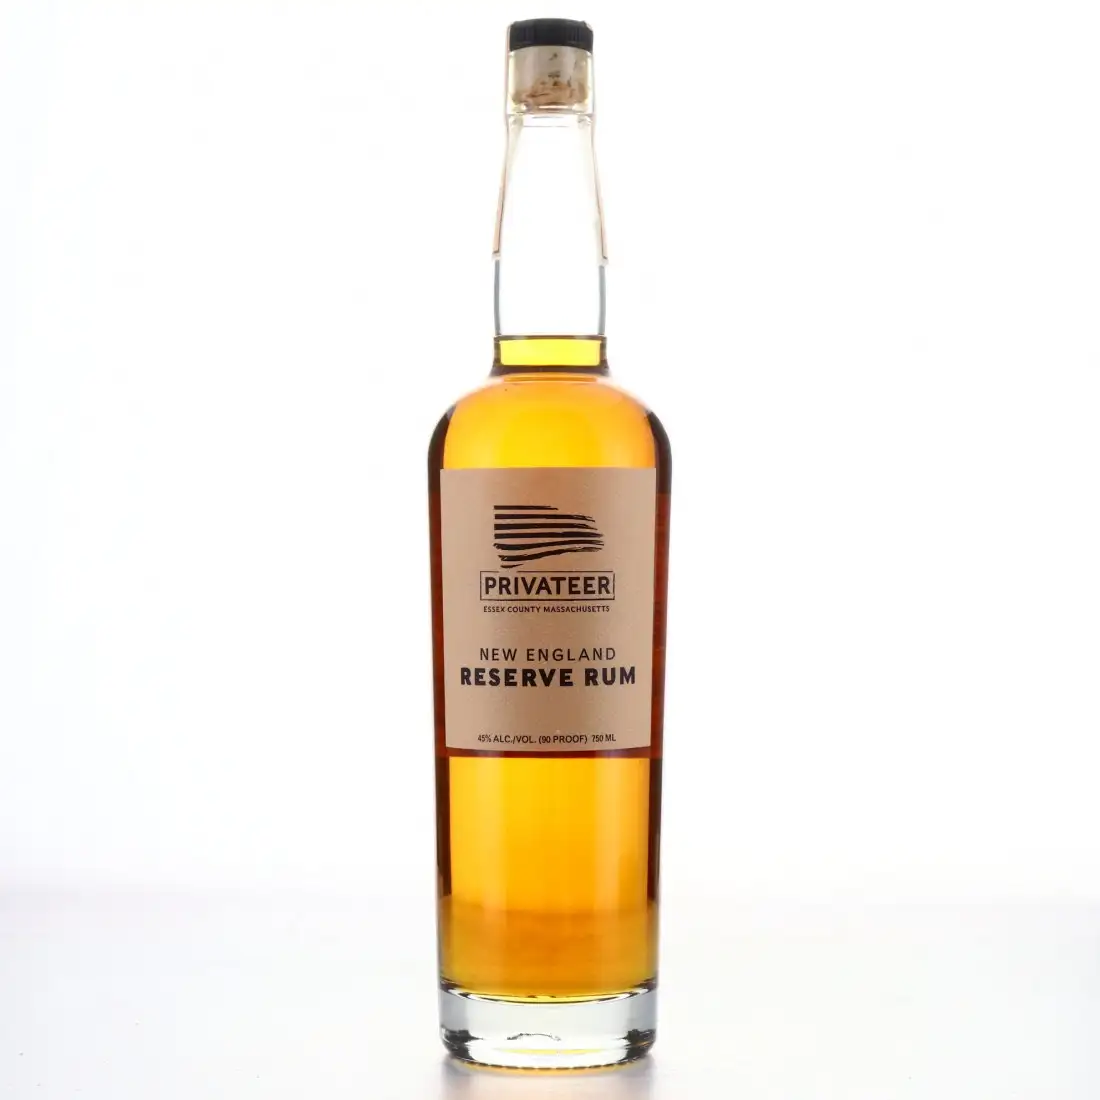 Image of the front of the bottle of the rum New England Reserve